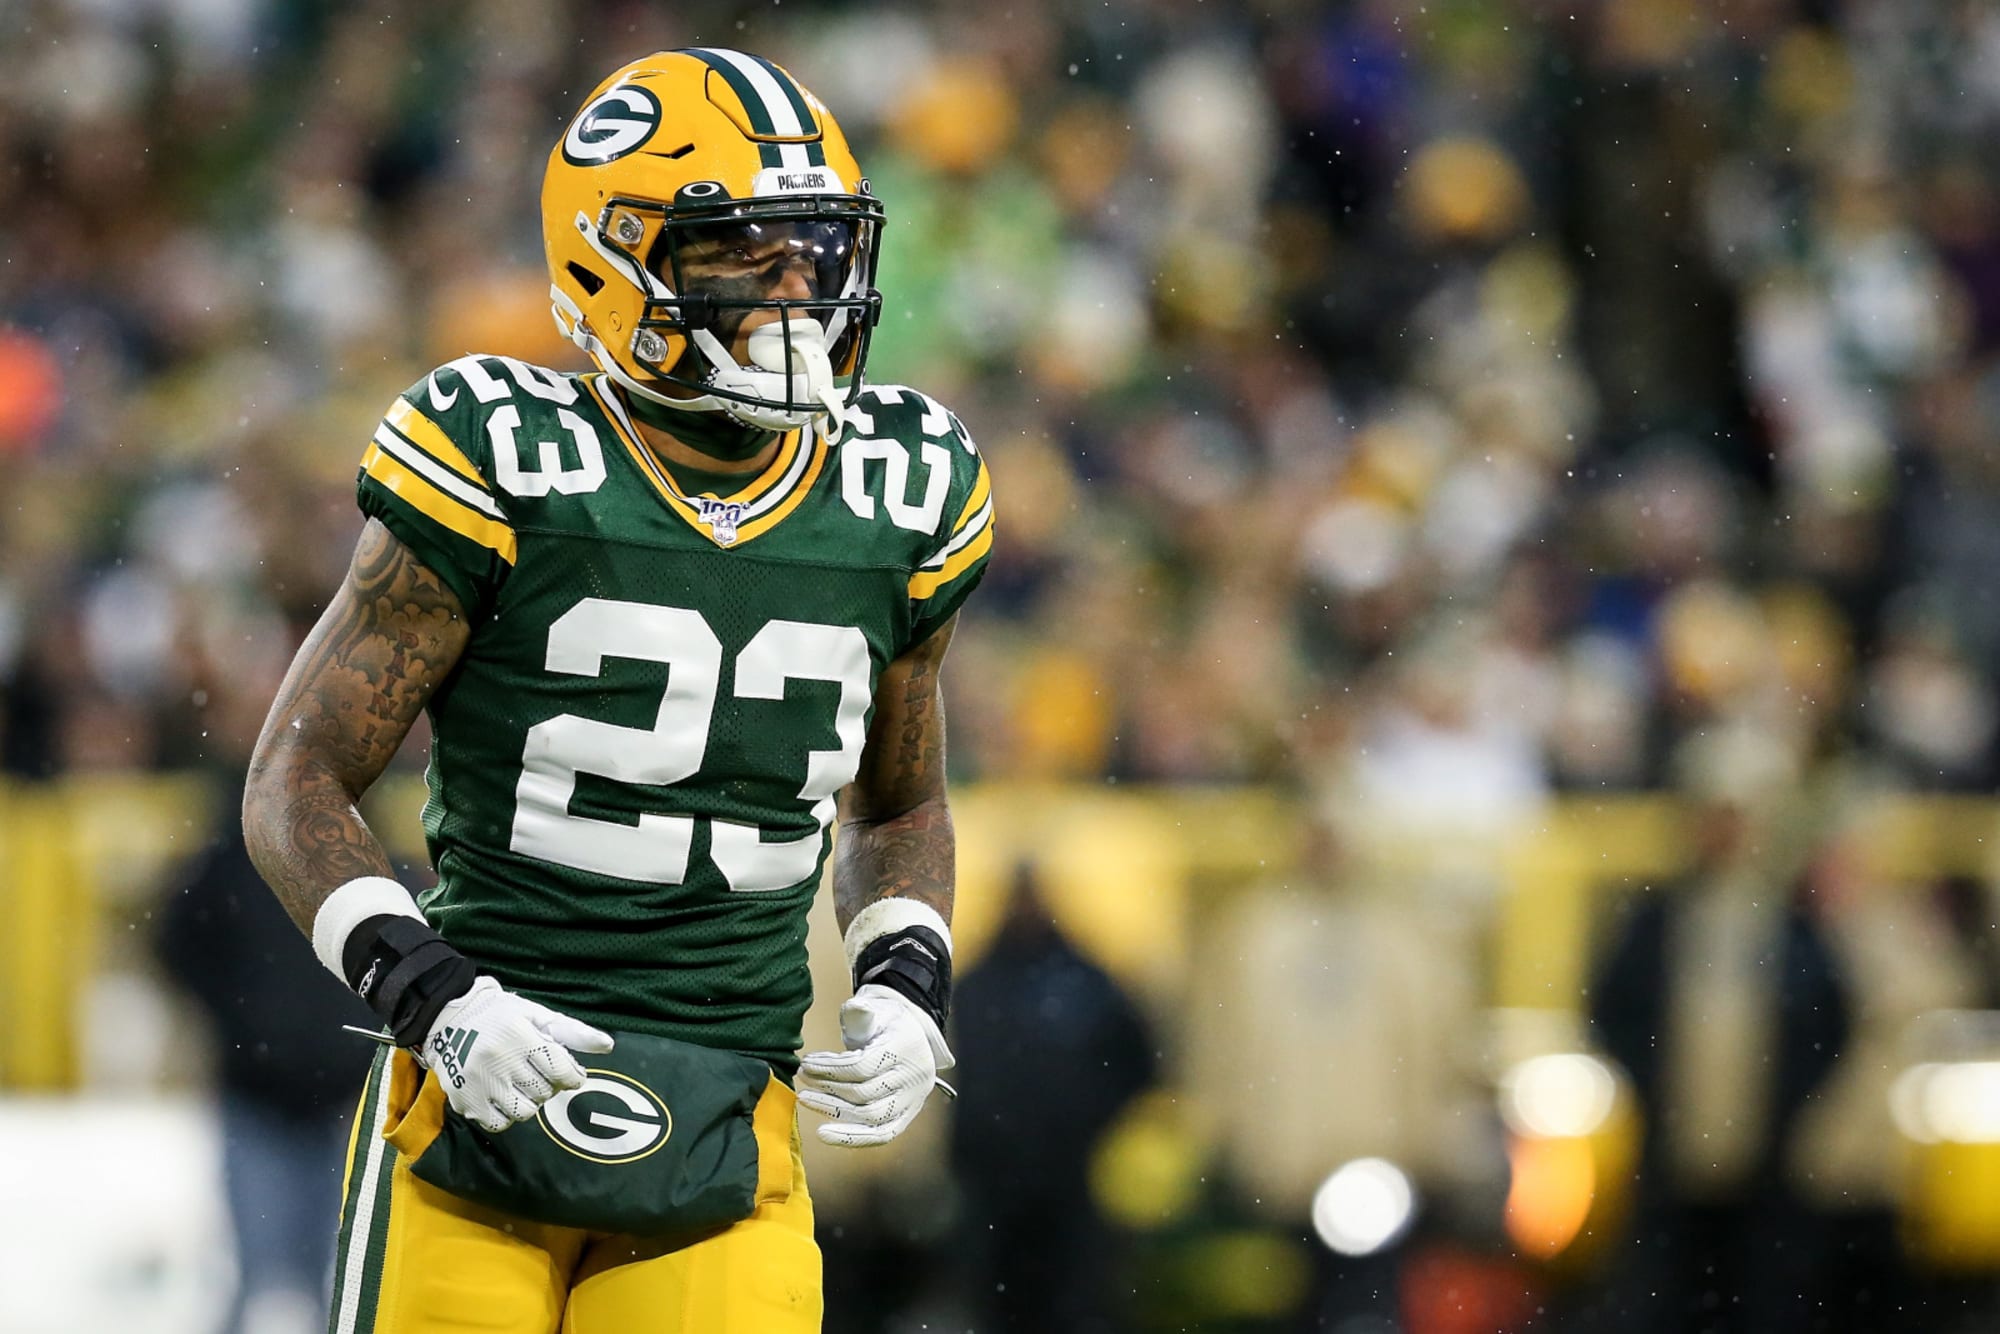 Jaire Alexander has chance to stand at NFL's pinnacle